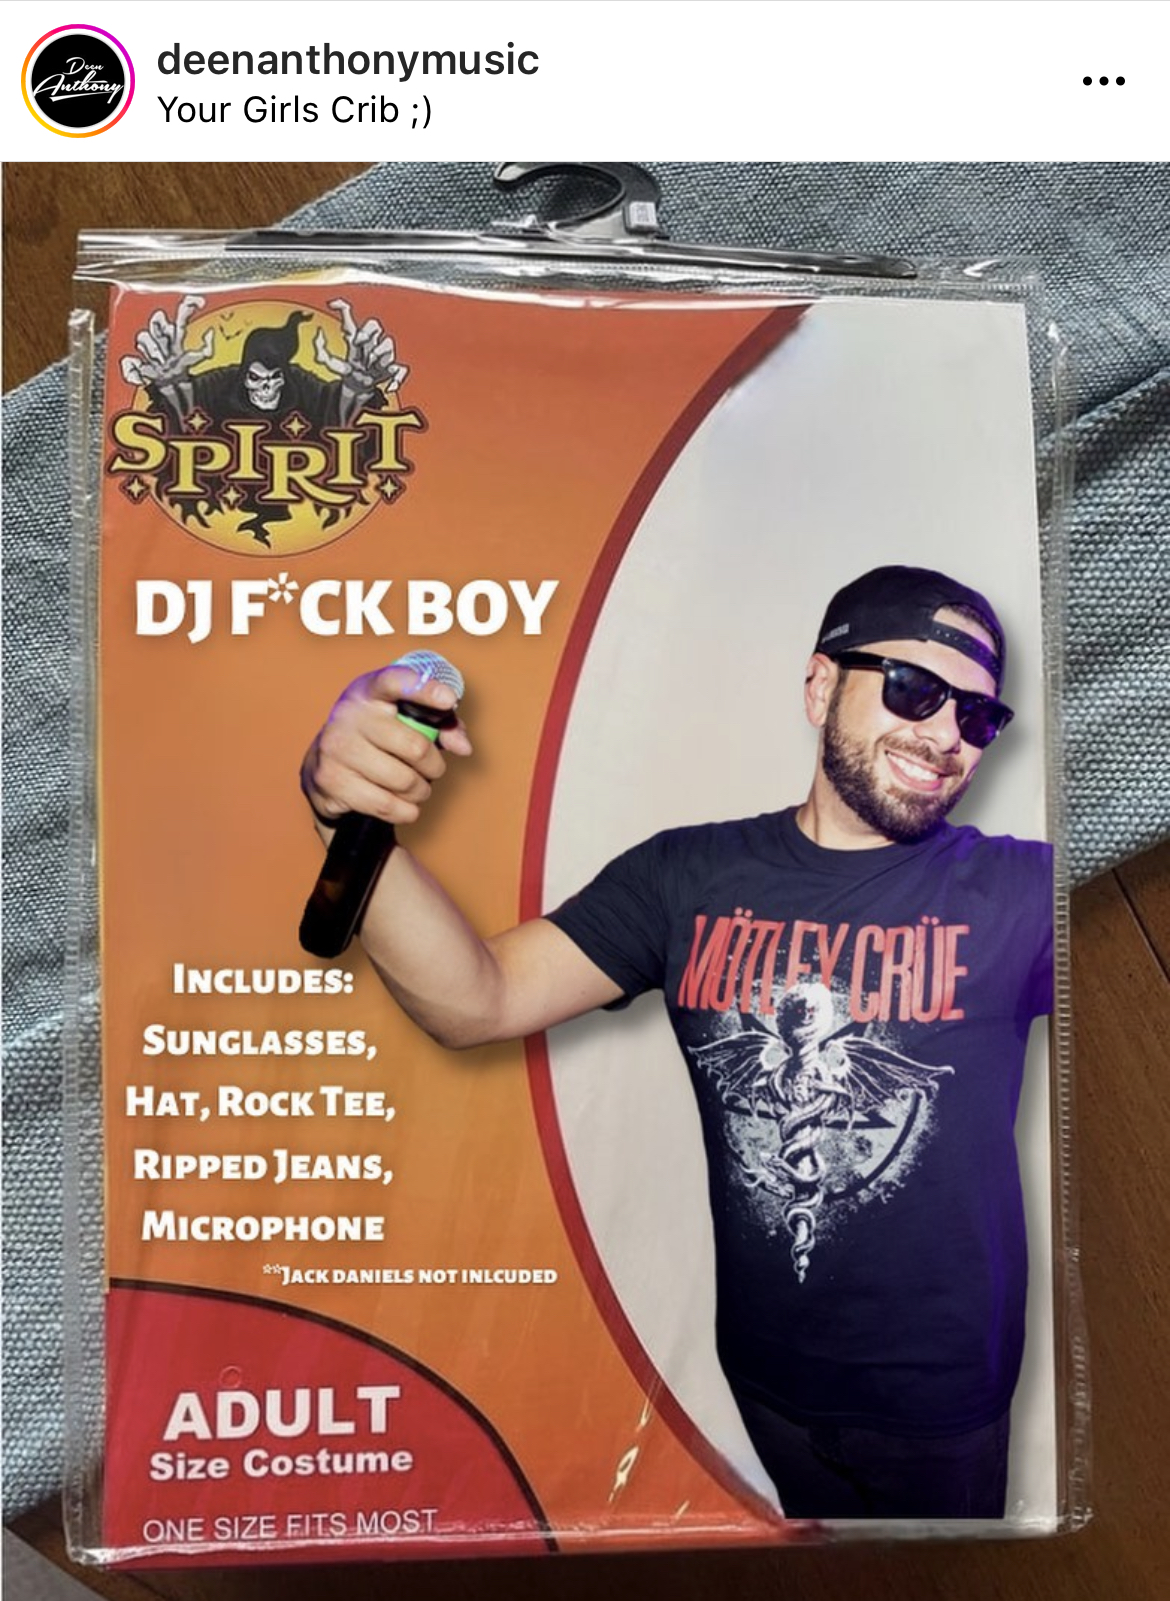 Costume Memes - spirit halloween - deenanthonymusic Your Girls Crib ; Spirit Dj FCk Boy Includes Sunglasses, Hat, Rock Tee, Ripped Jeans, Microphone "Jack Daniels Not Inlcused Adult Size Costume One Size Fits Most Miley Cre